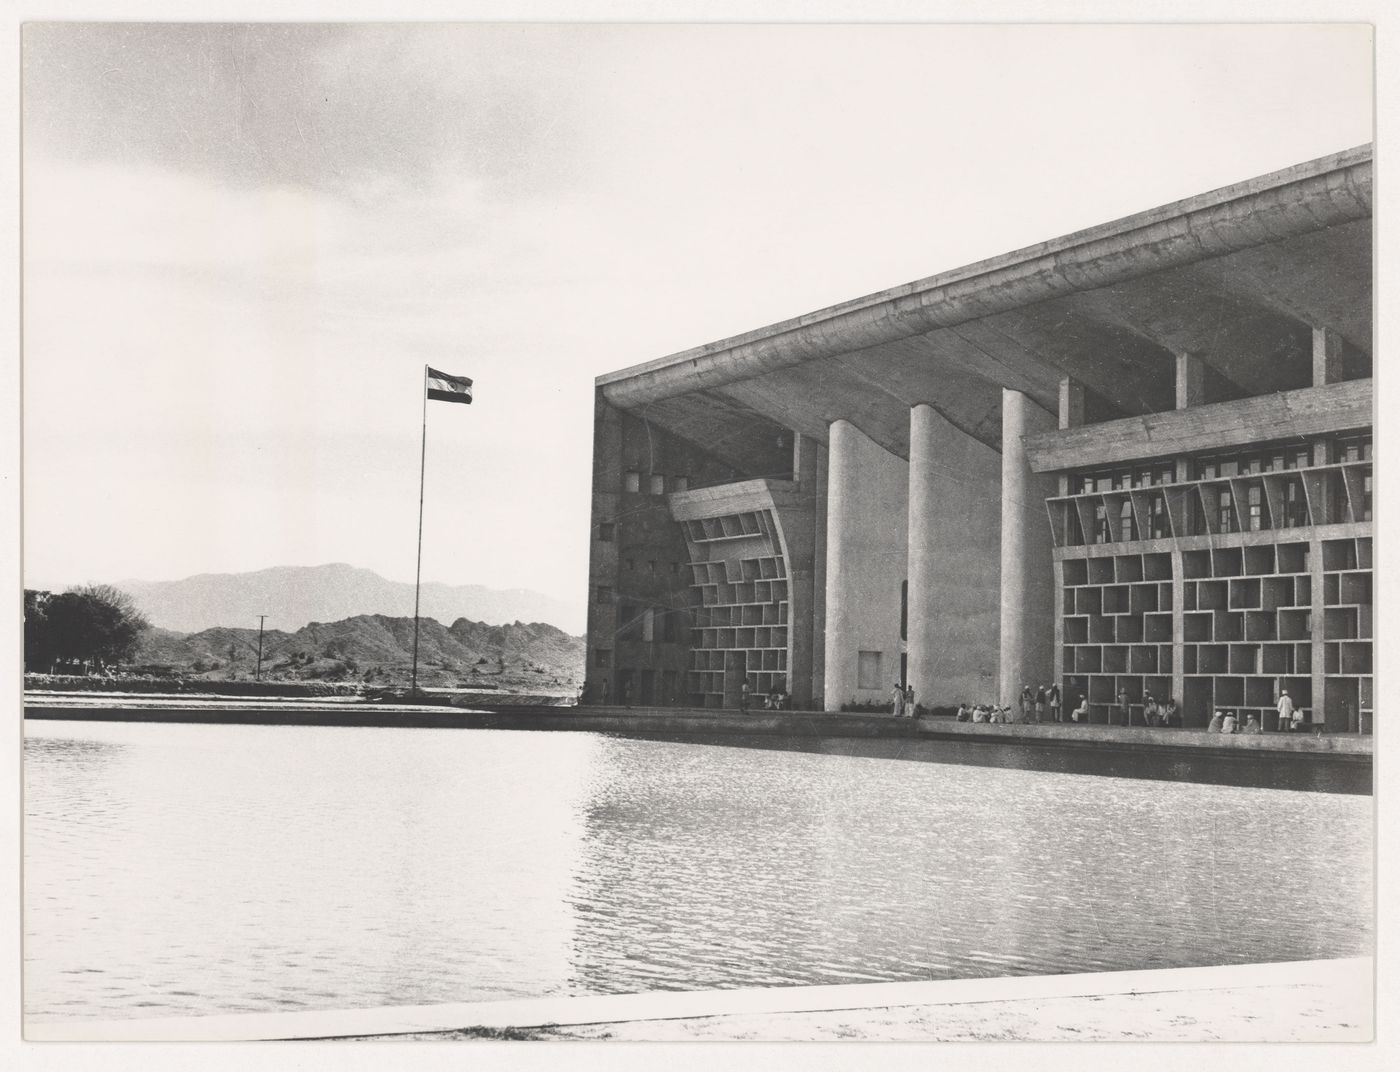 Partial view of the High Court and pool, Capitol Complex, Sector 1, Chandigarh, India